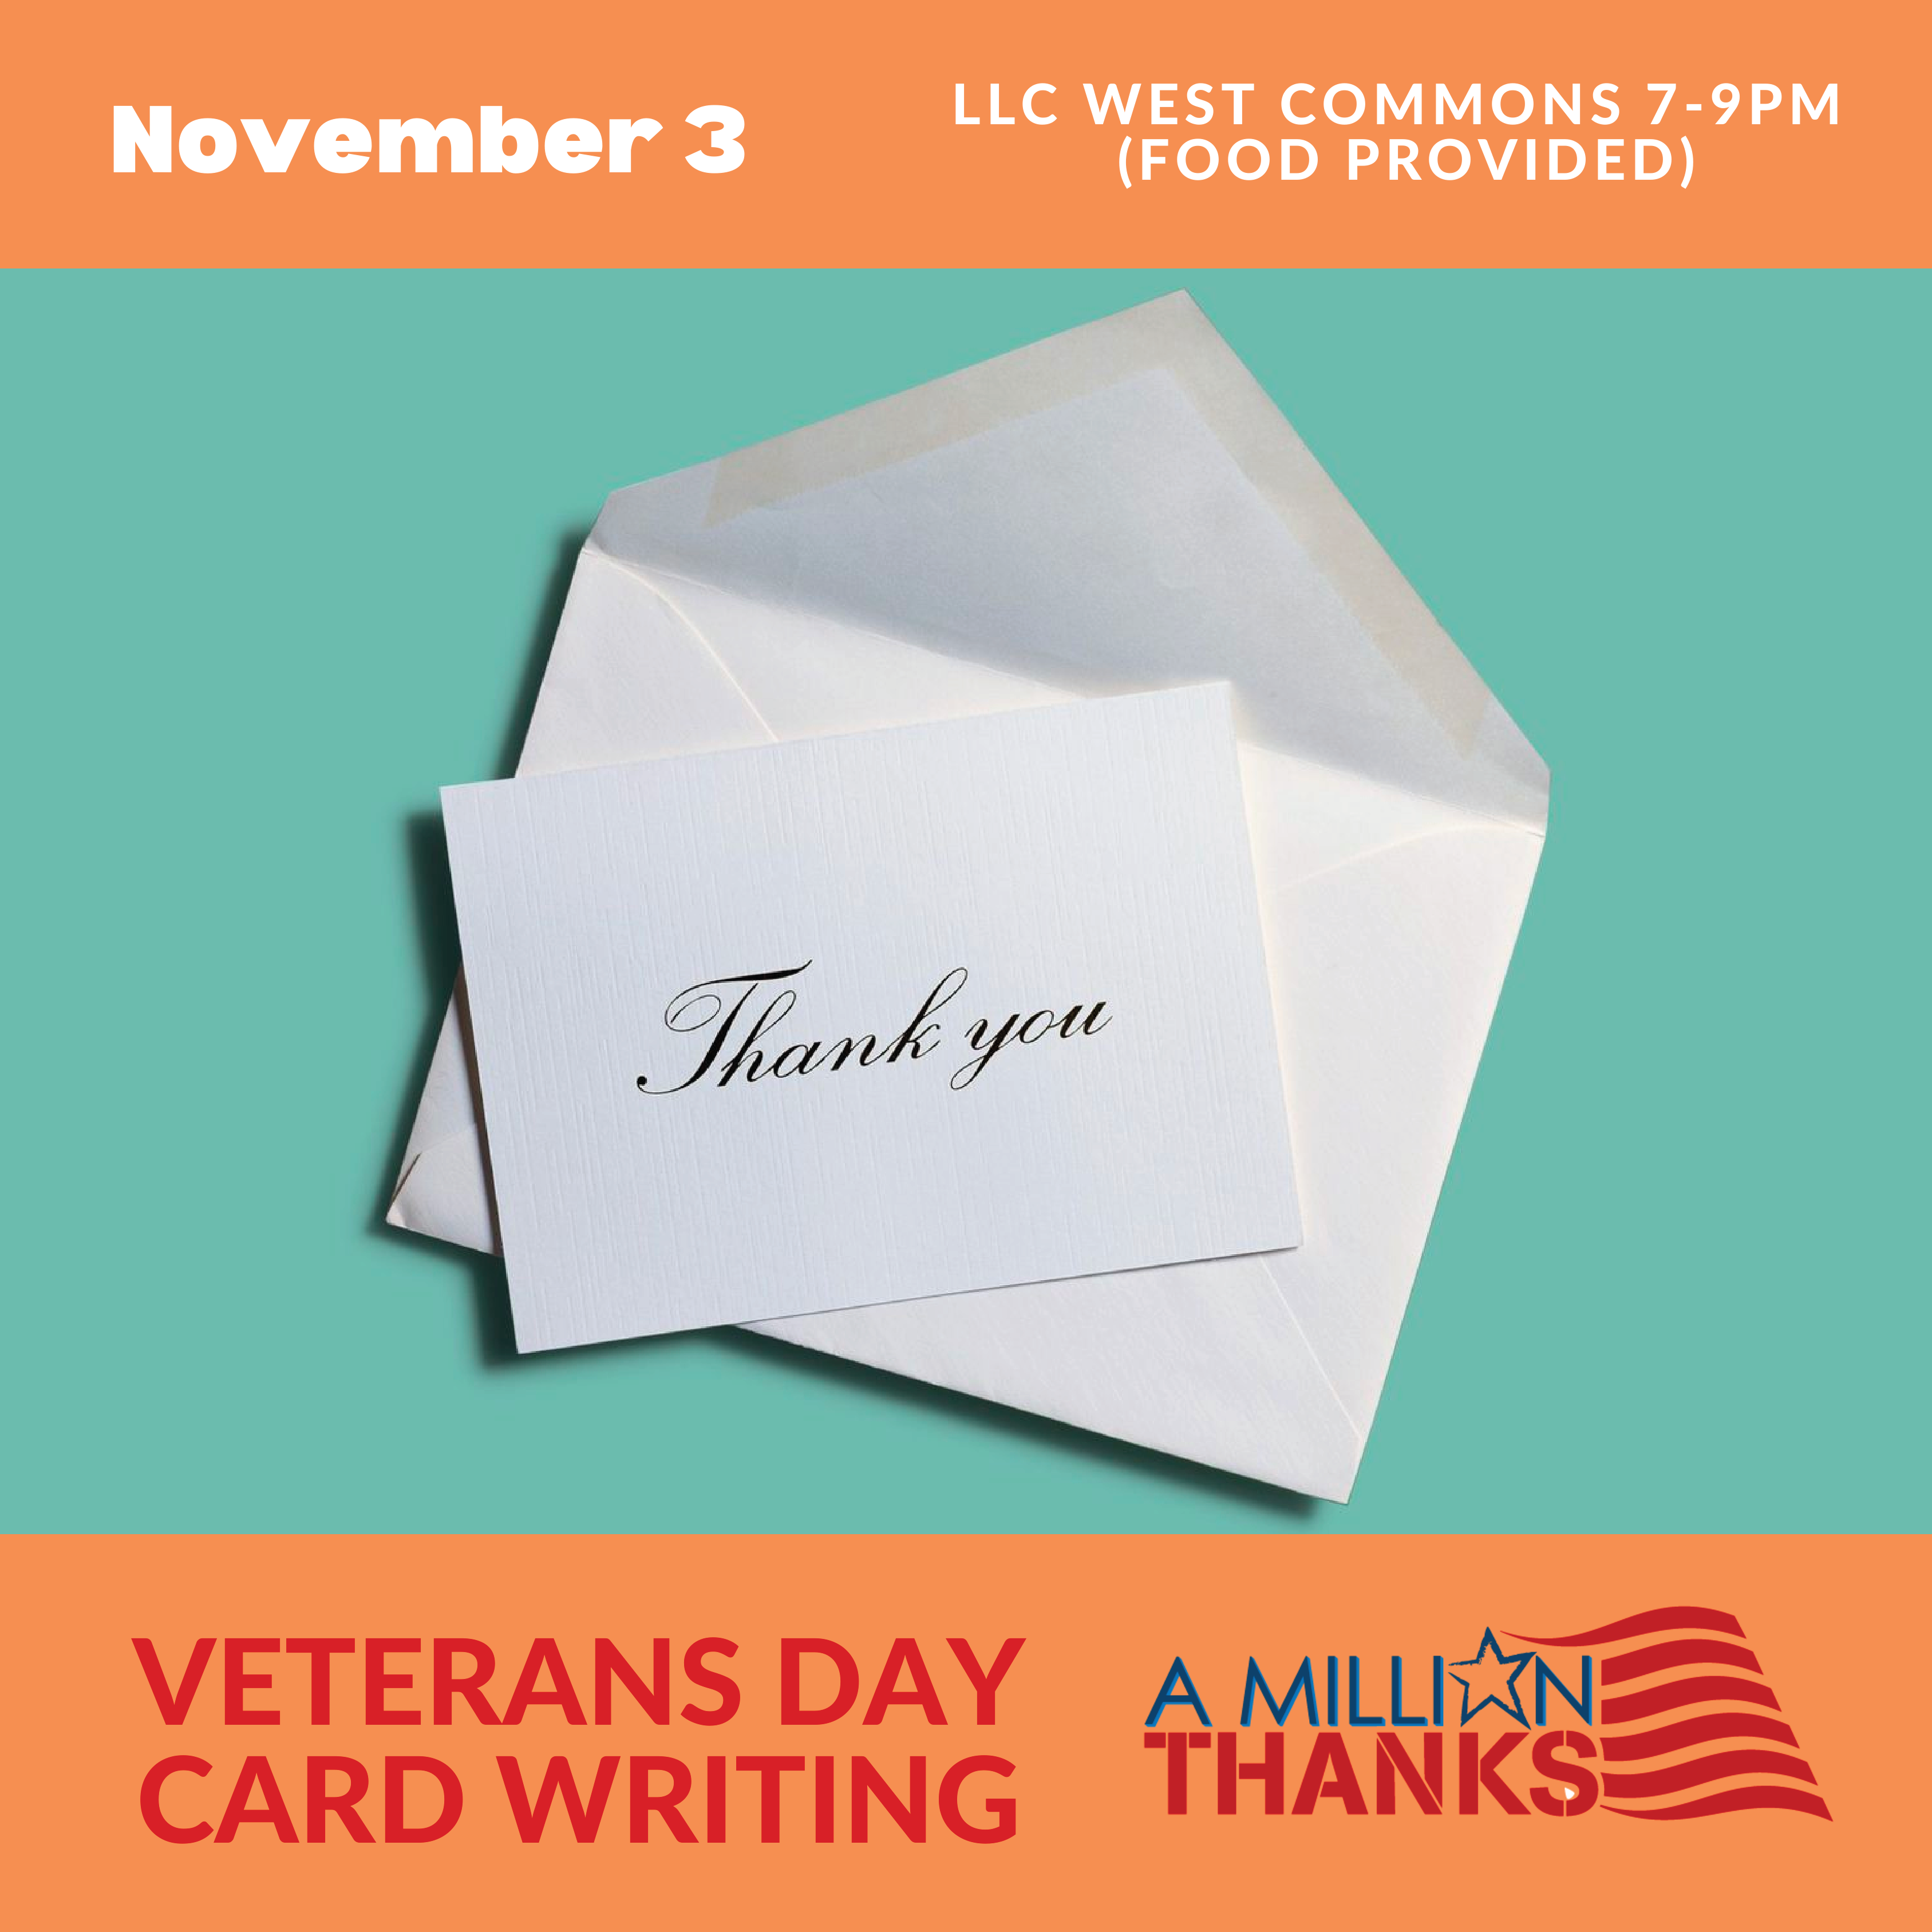 A graphic promoting the Veterans Day card writing event. The image includes a picture of a letter saying "thank you" and the logo of the non-profit A Million Thanks.
